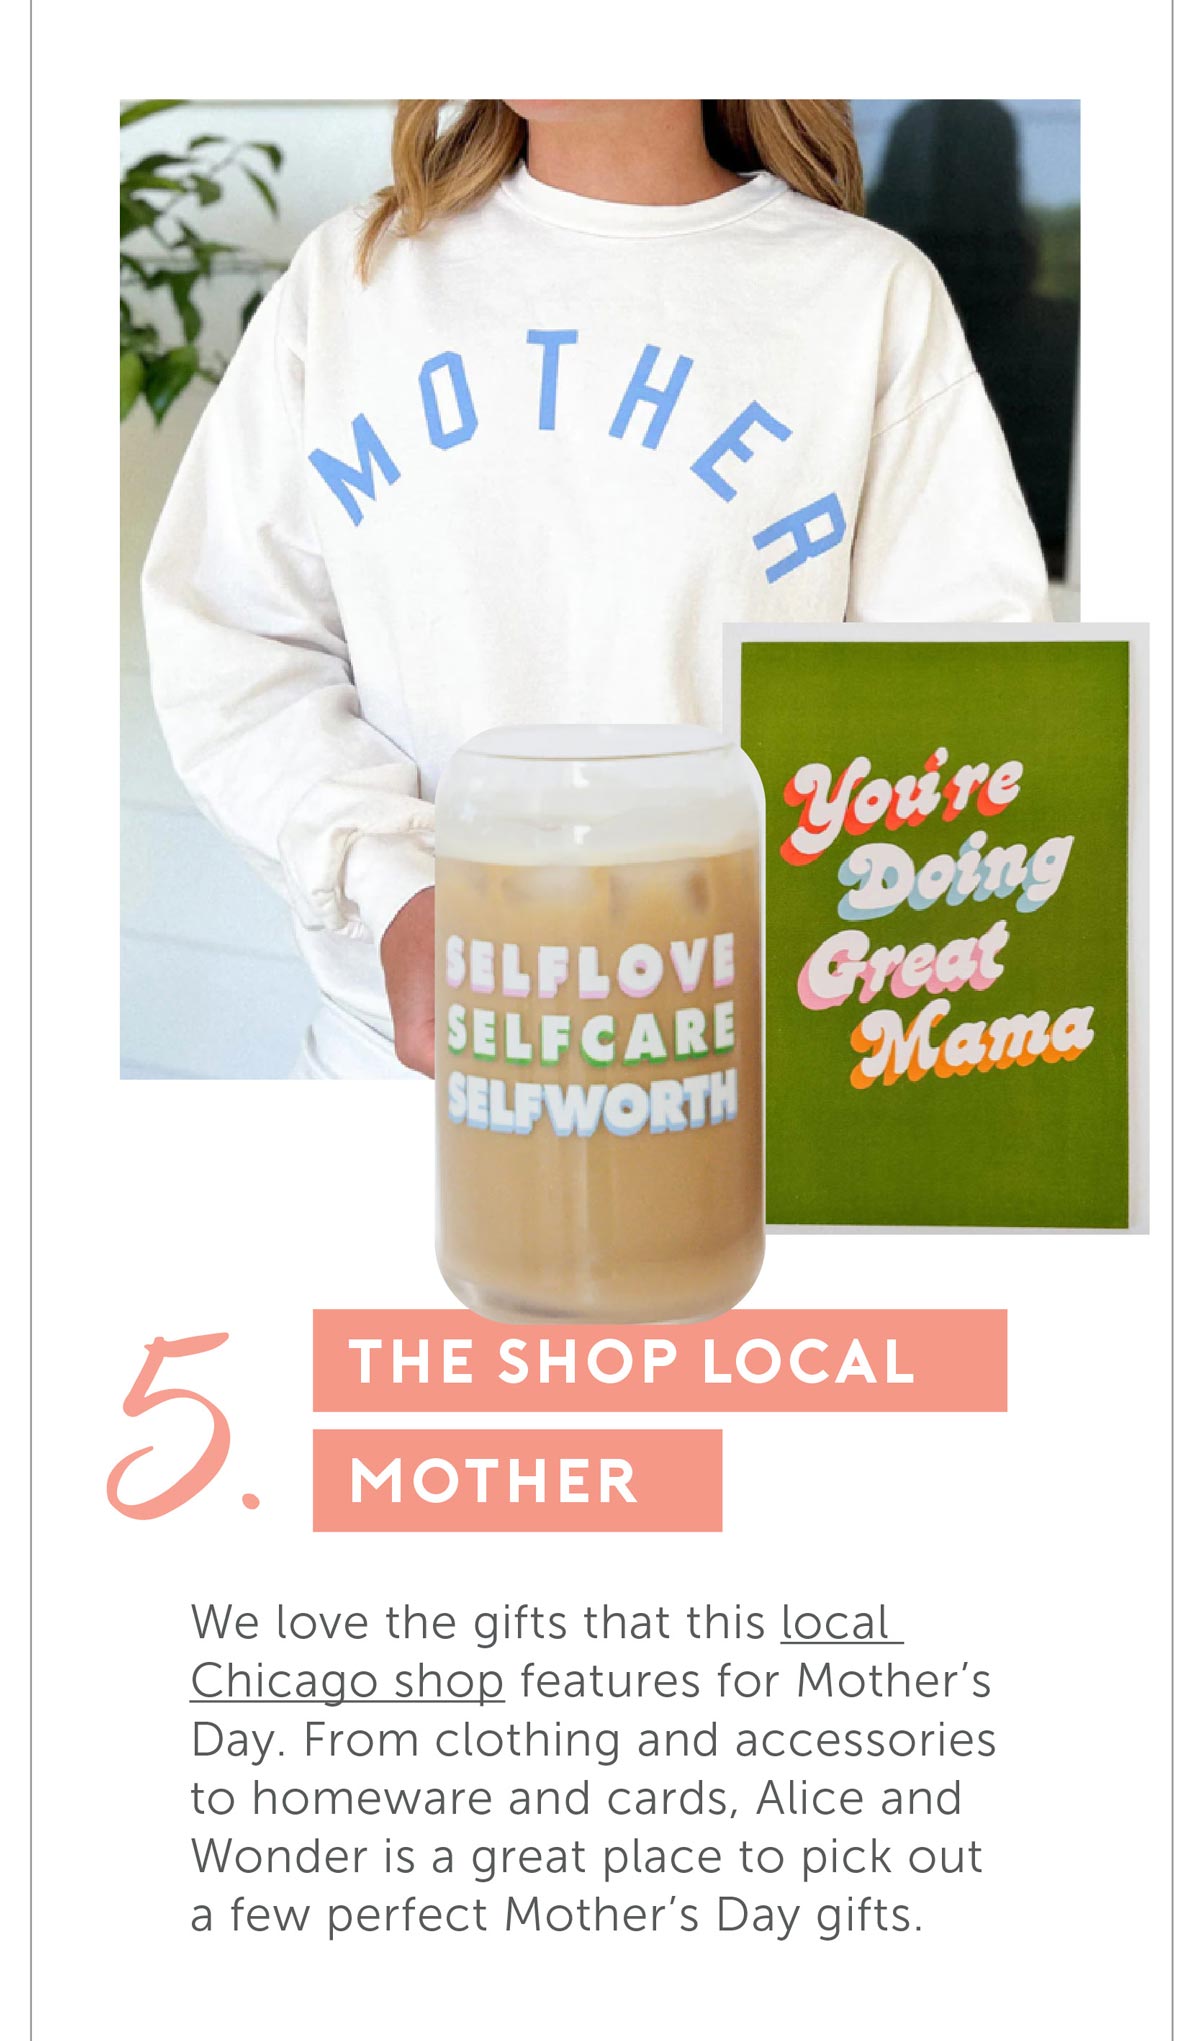 5. For The Shop Local Mother. We love the gifts that this local Chicago shop features for Mother's Day. From clothing and accessories to homeware and cards, Alice and Wonder is a great place to pick out a few perfect Mother's Day gifts.